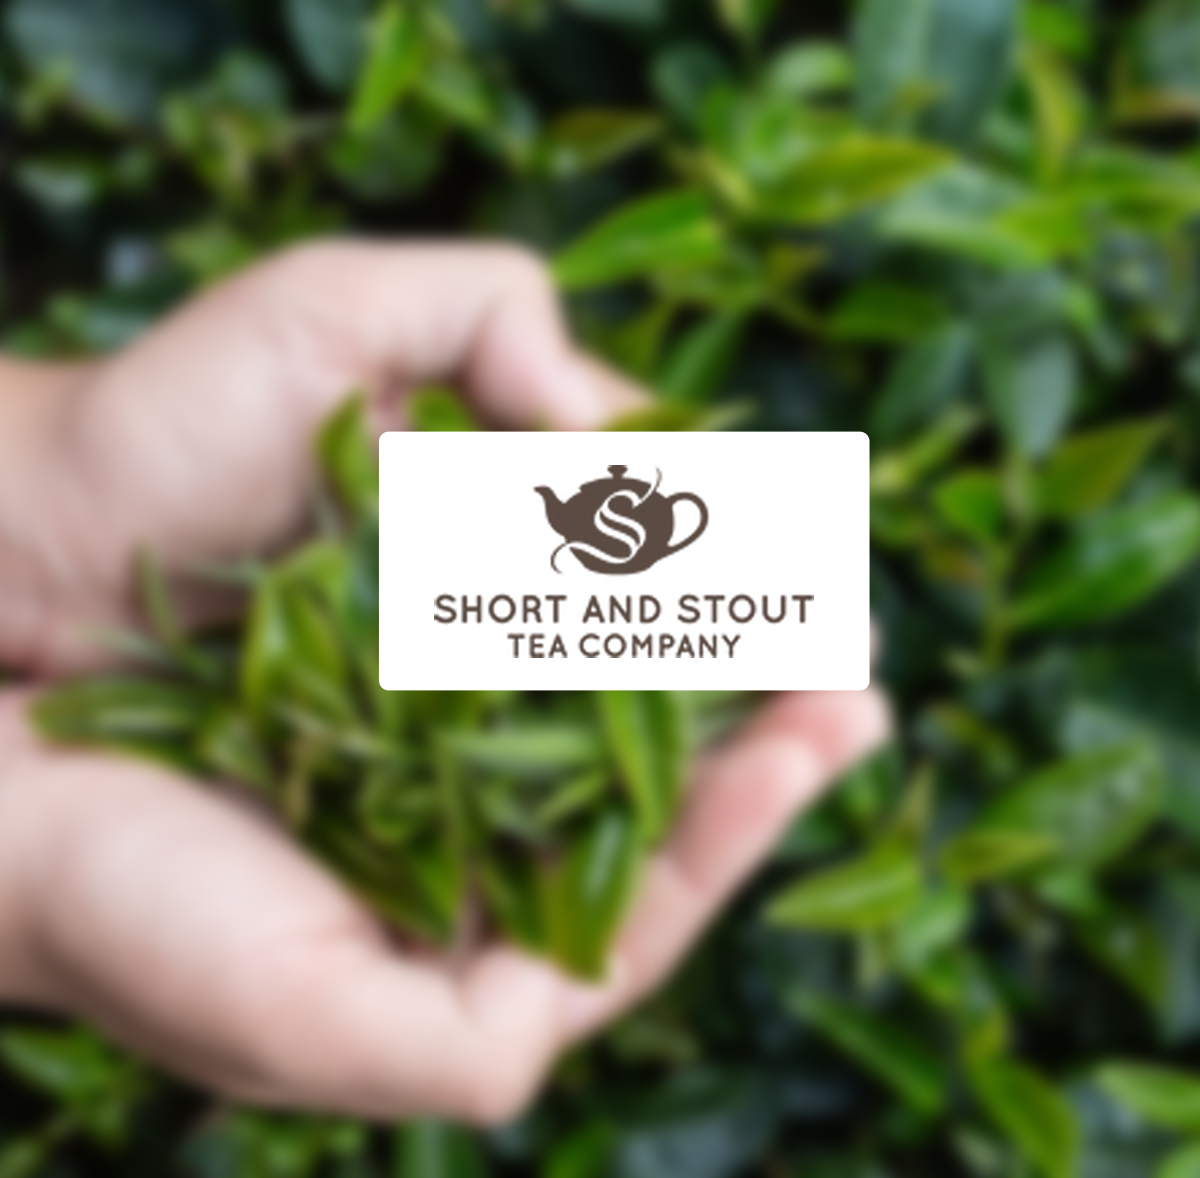 What’s Brewing at Short and Stout Tea in October